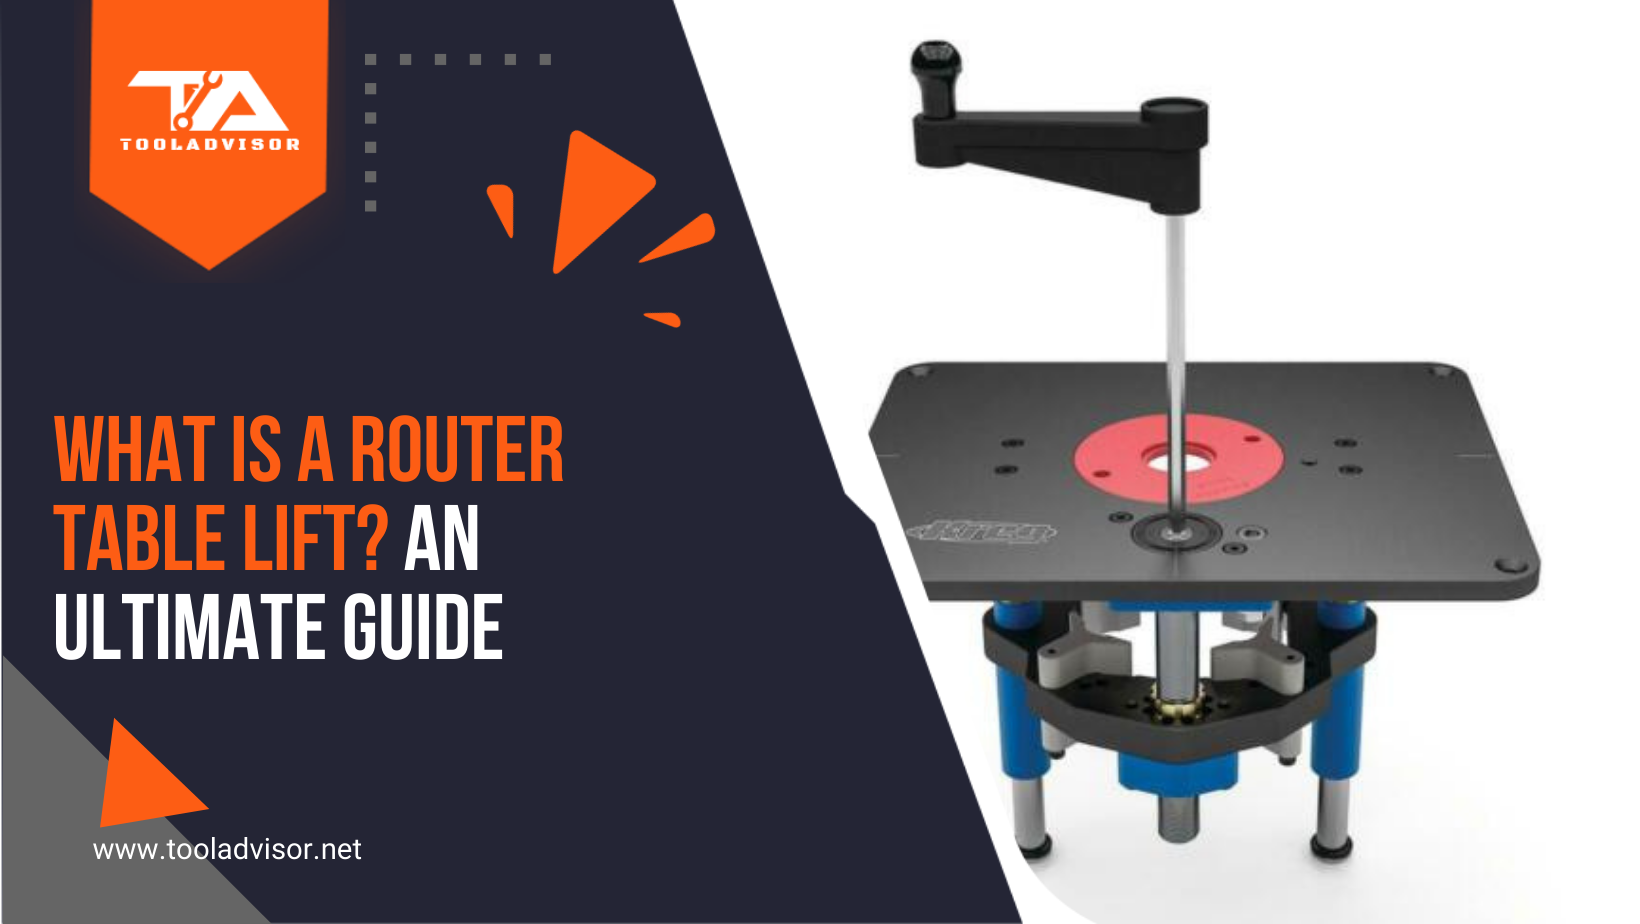 What Is a Router Table Lift